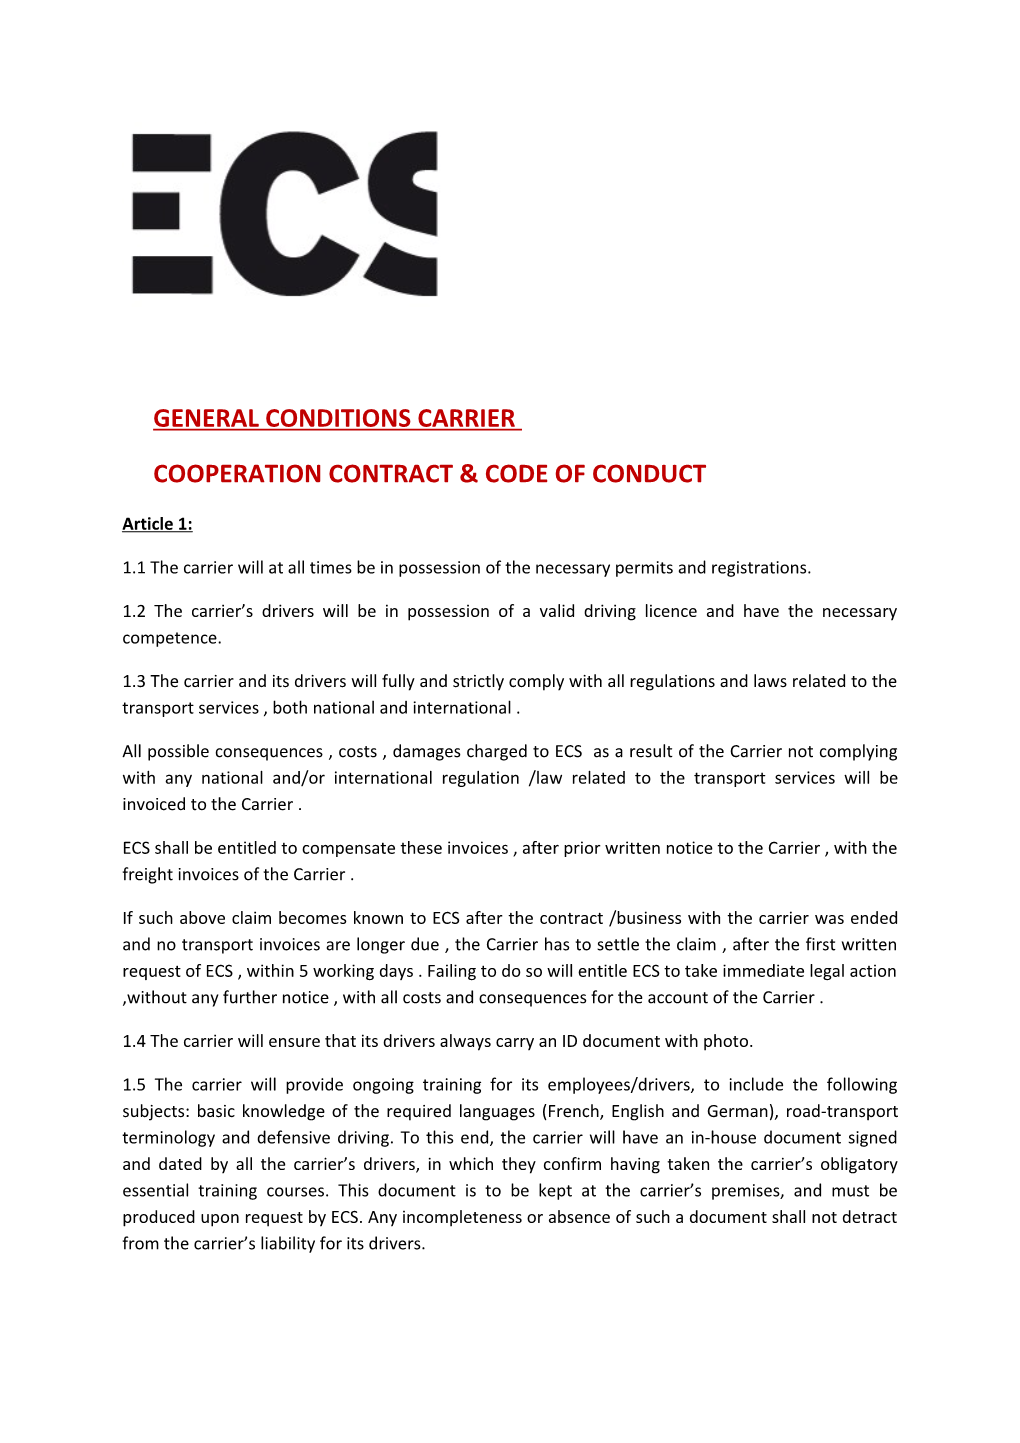 Cooperation Contract & Code of Conduct